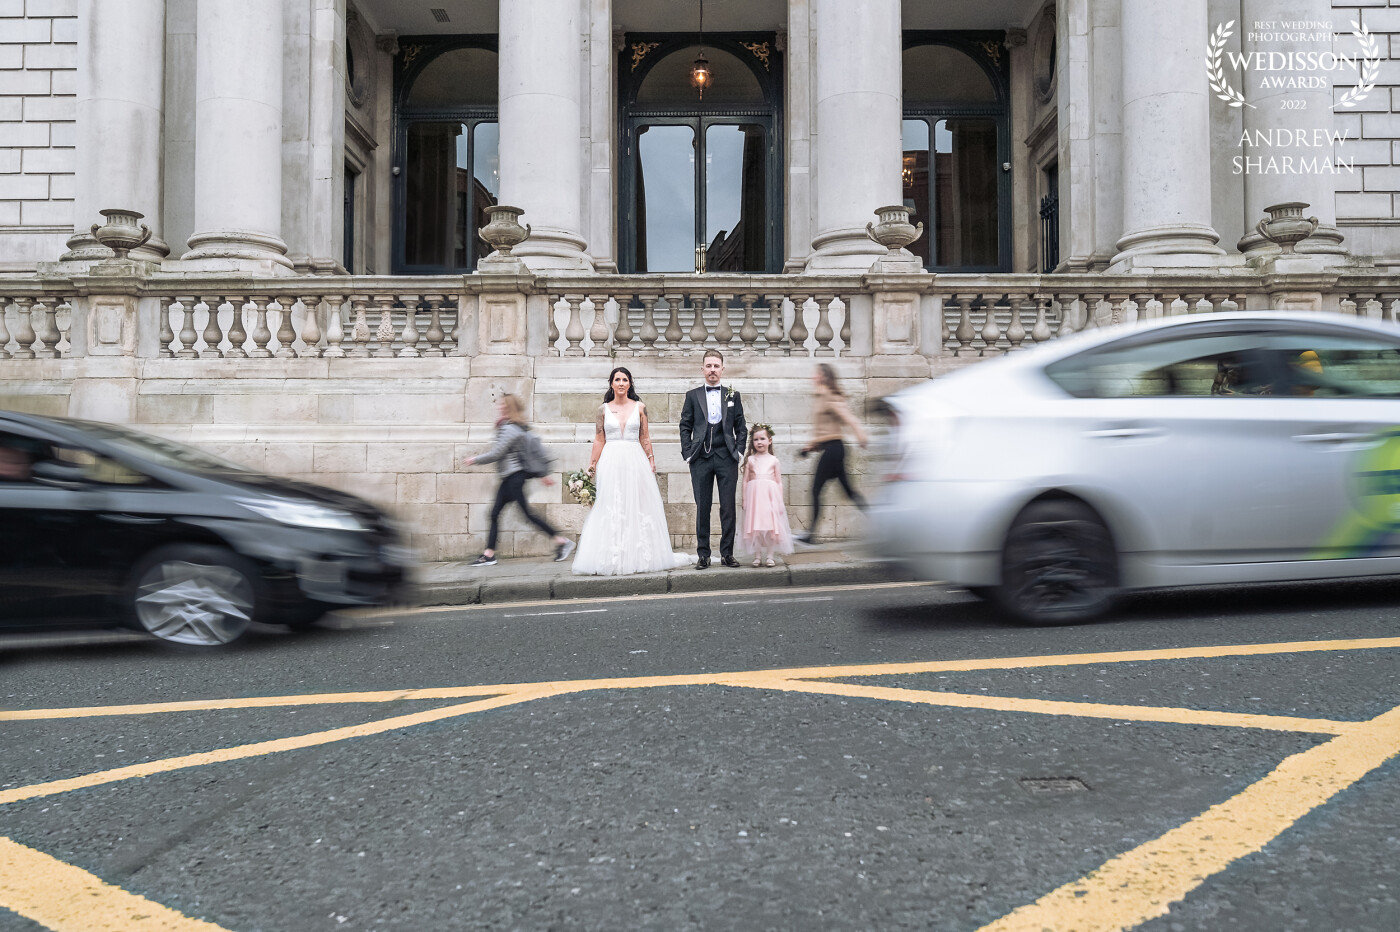 Rob and Jen's Dublin city wedding at City hall, I wanted to show how timeless this couples love for each other and their 6 year old daughter Erin is by using some shutter drag and slowing traffic and people passing by in the shot, definitely one of my favorites from their day :)